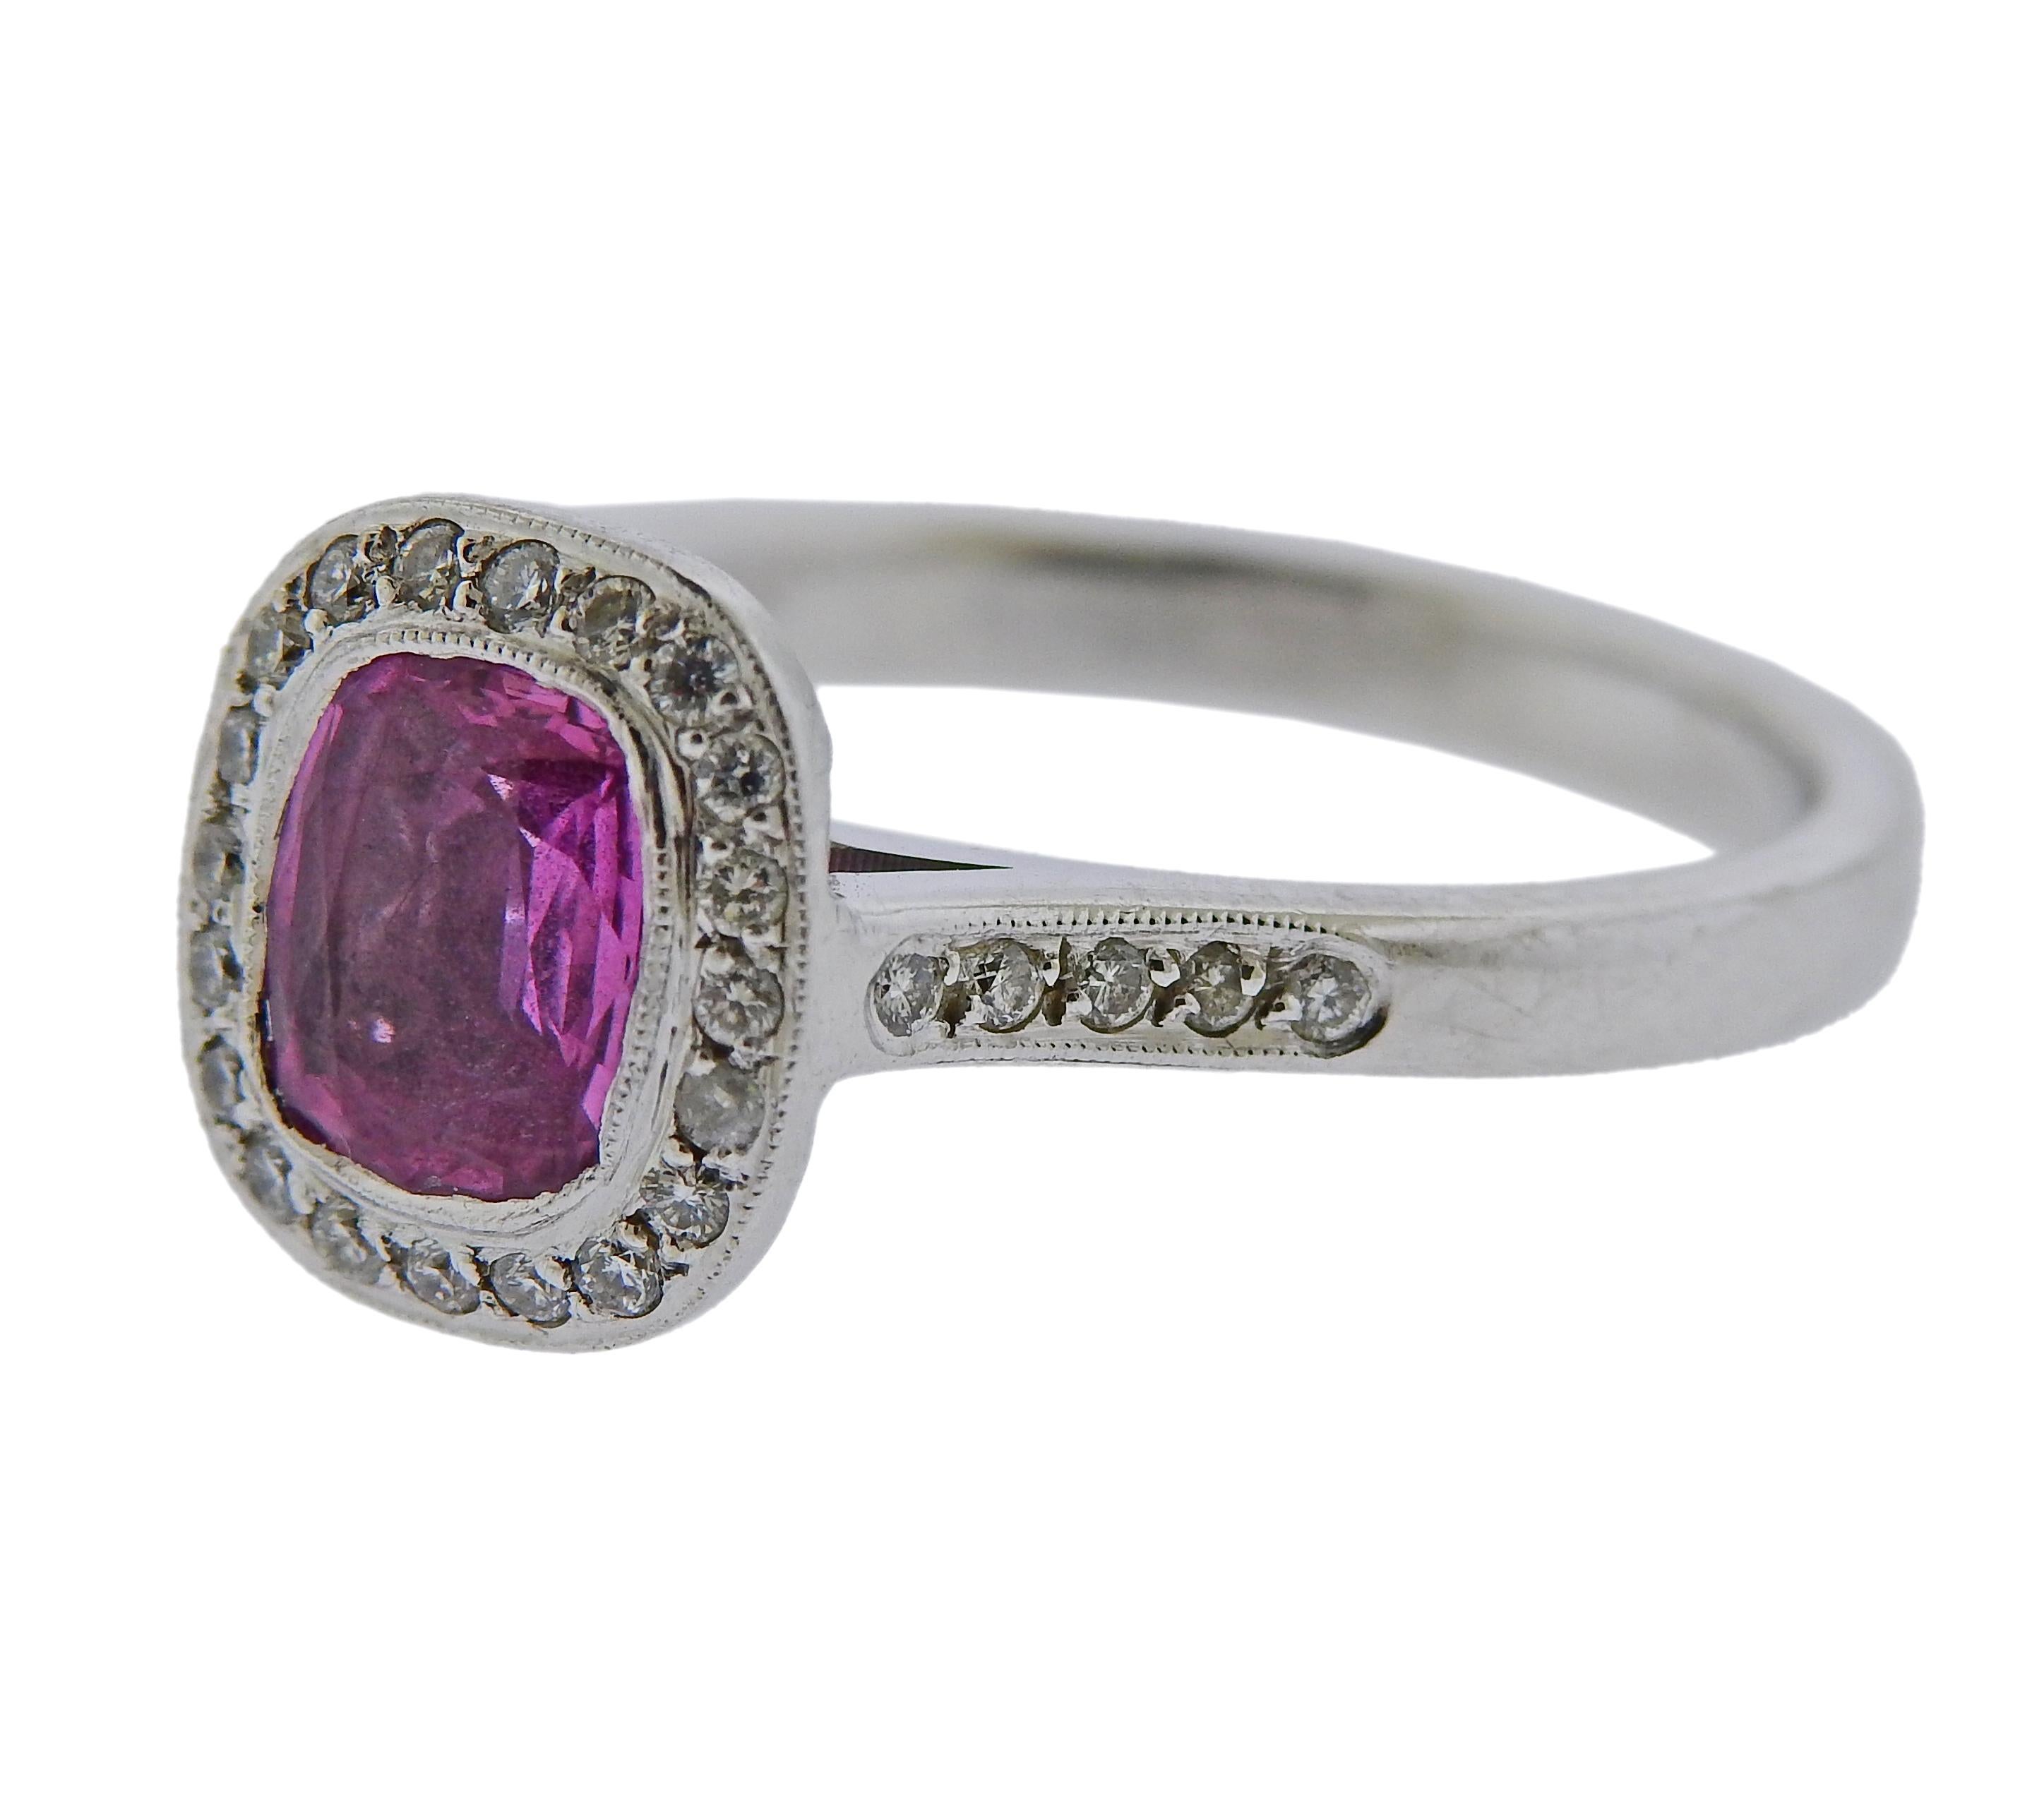 14k white gold engagement ring, set with an approx. 1.41ct pink sapphire, surrounded with diamonds. Ring size 9.25, ring top - 12mm x 10.7mm. MArked 14k. Weighs 6.2 grams.

SKU#R-03003
